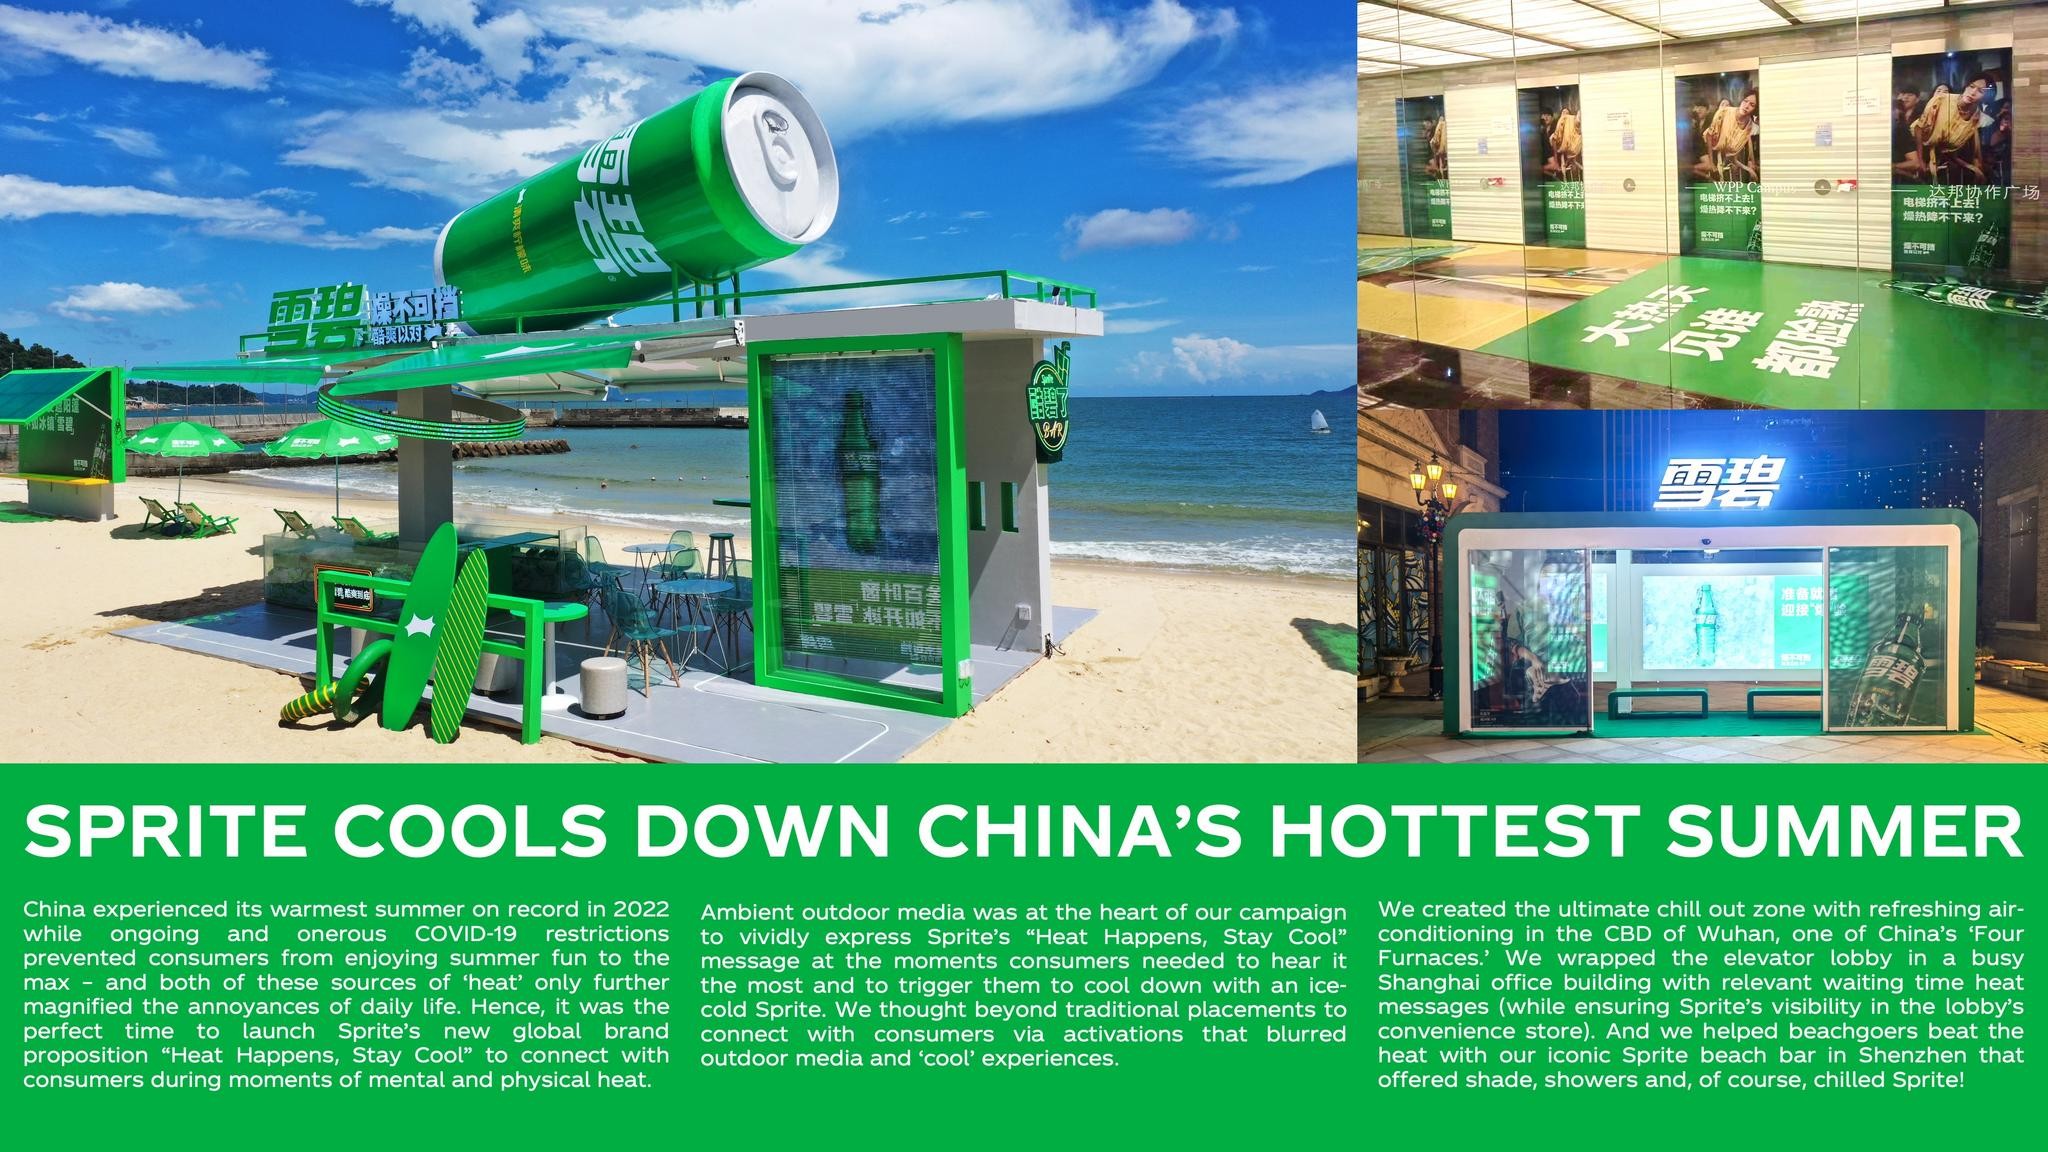 Sprite Cools Down China’s Hottest Summer